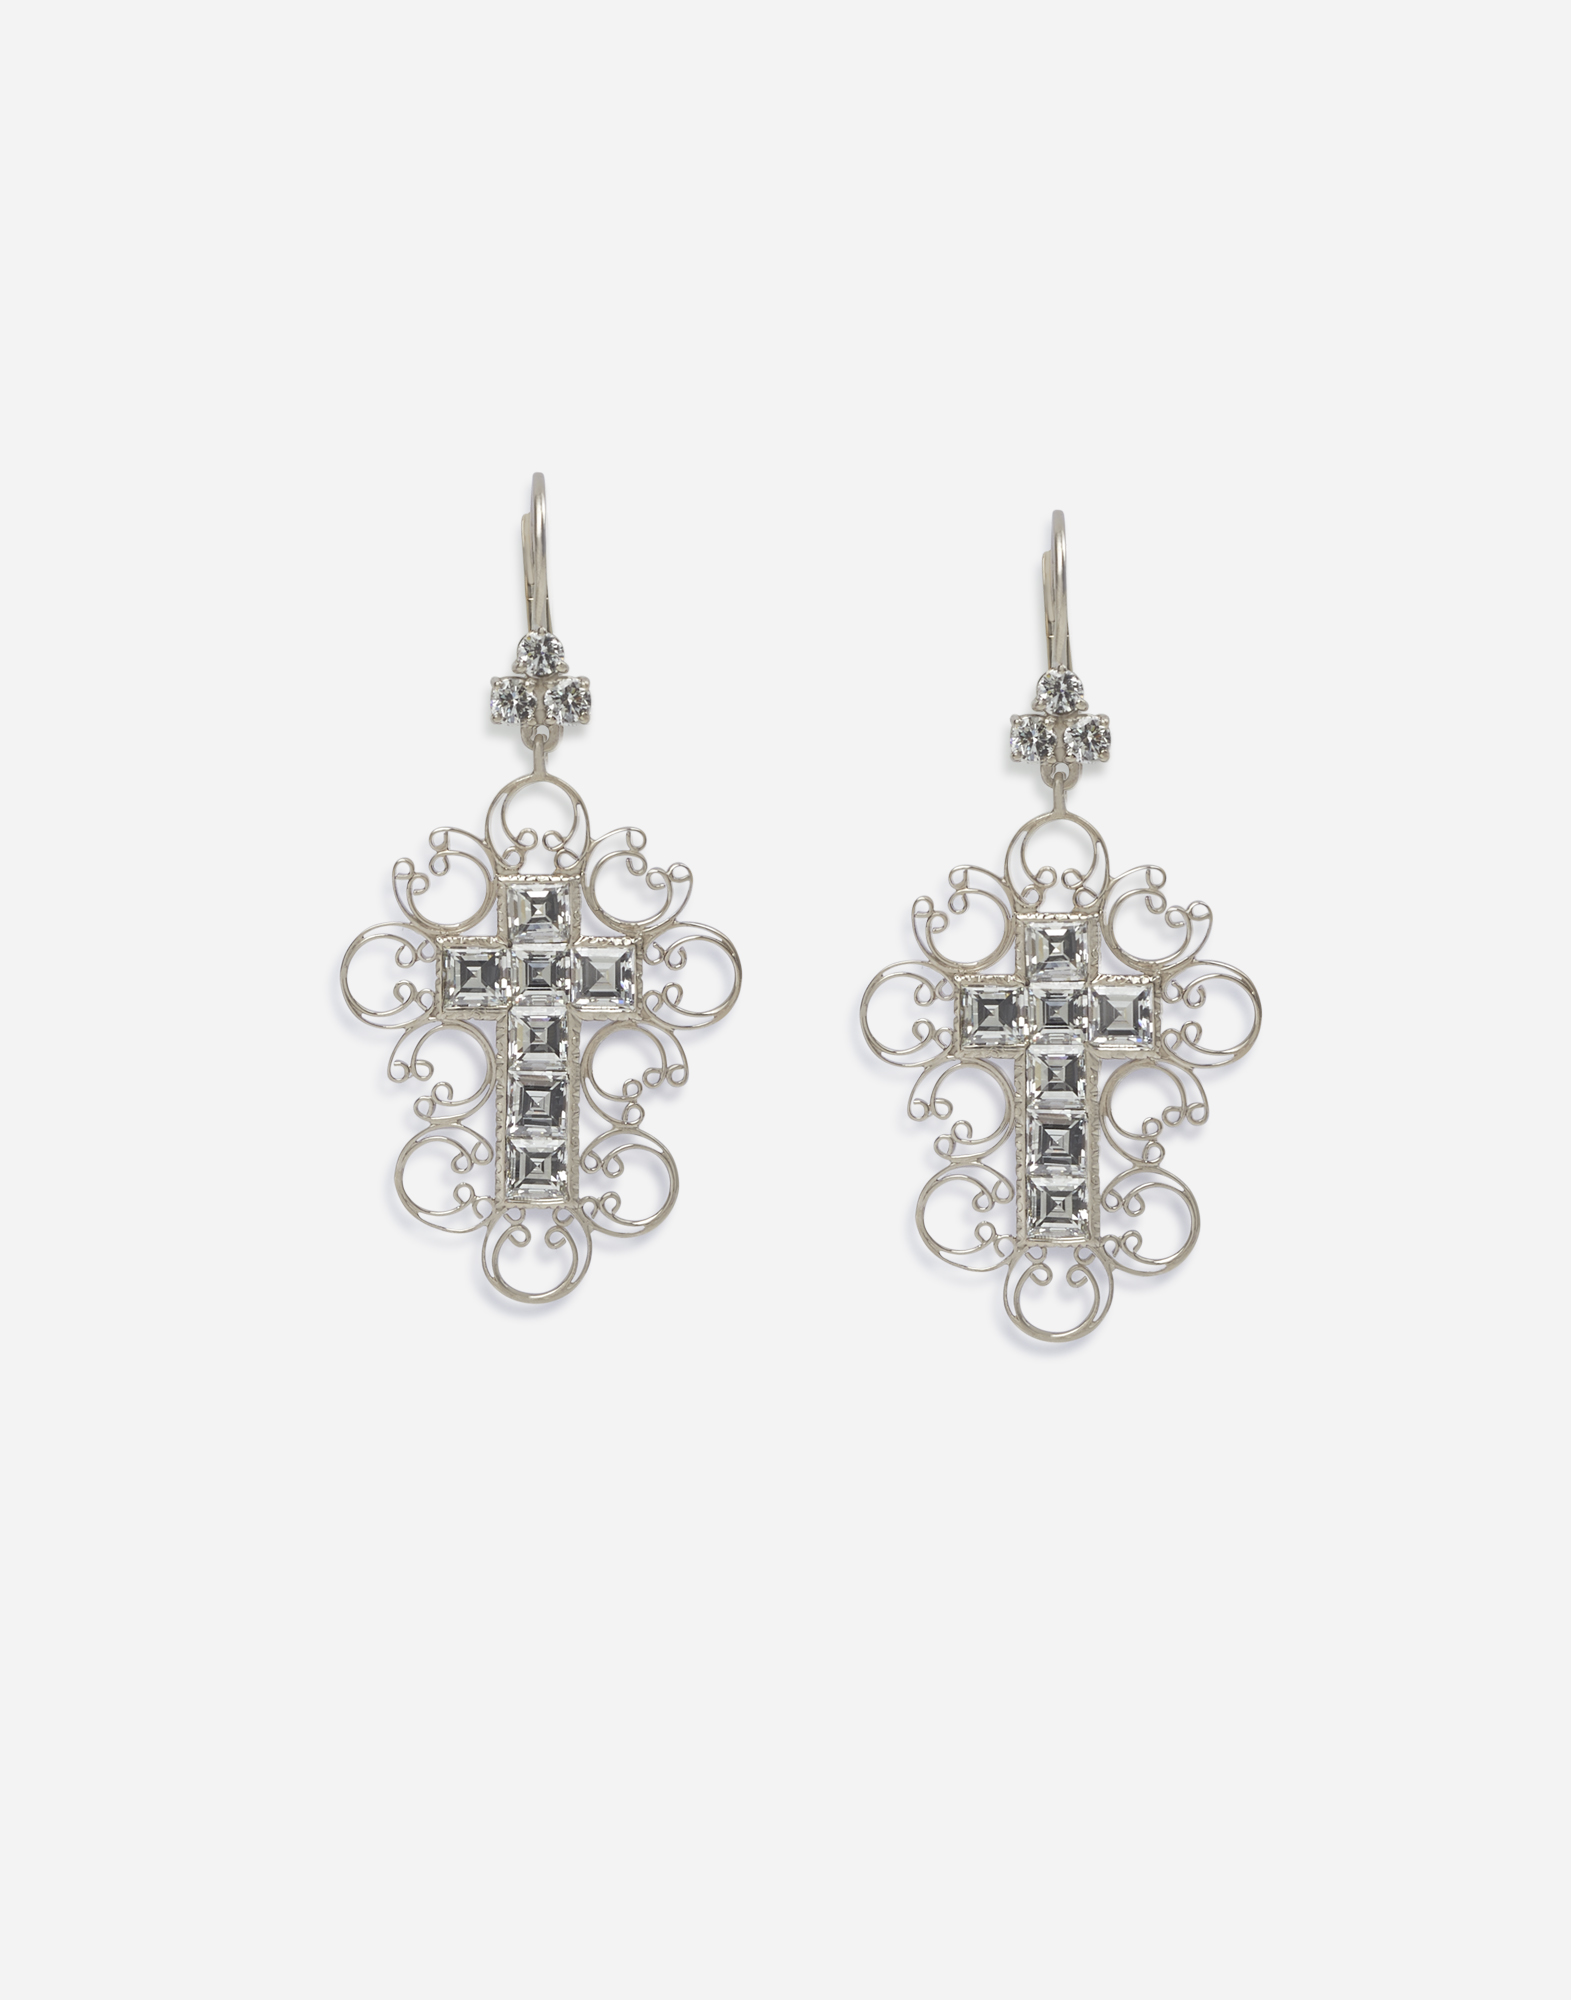 Barocco earrings in white gold with diamonds in White Gold